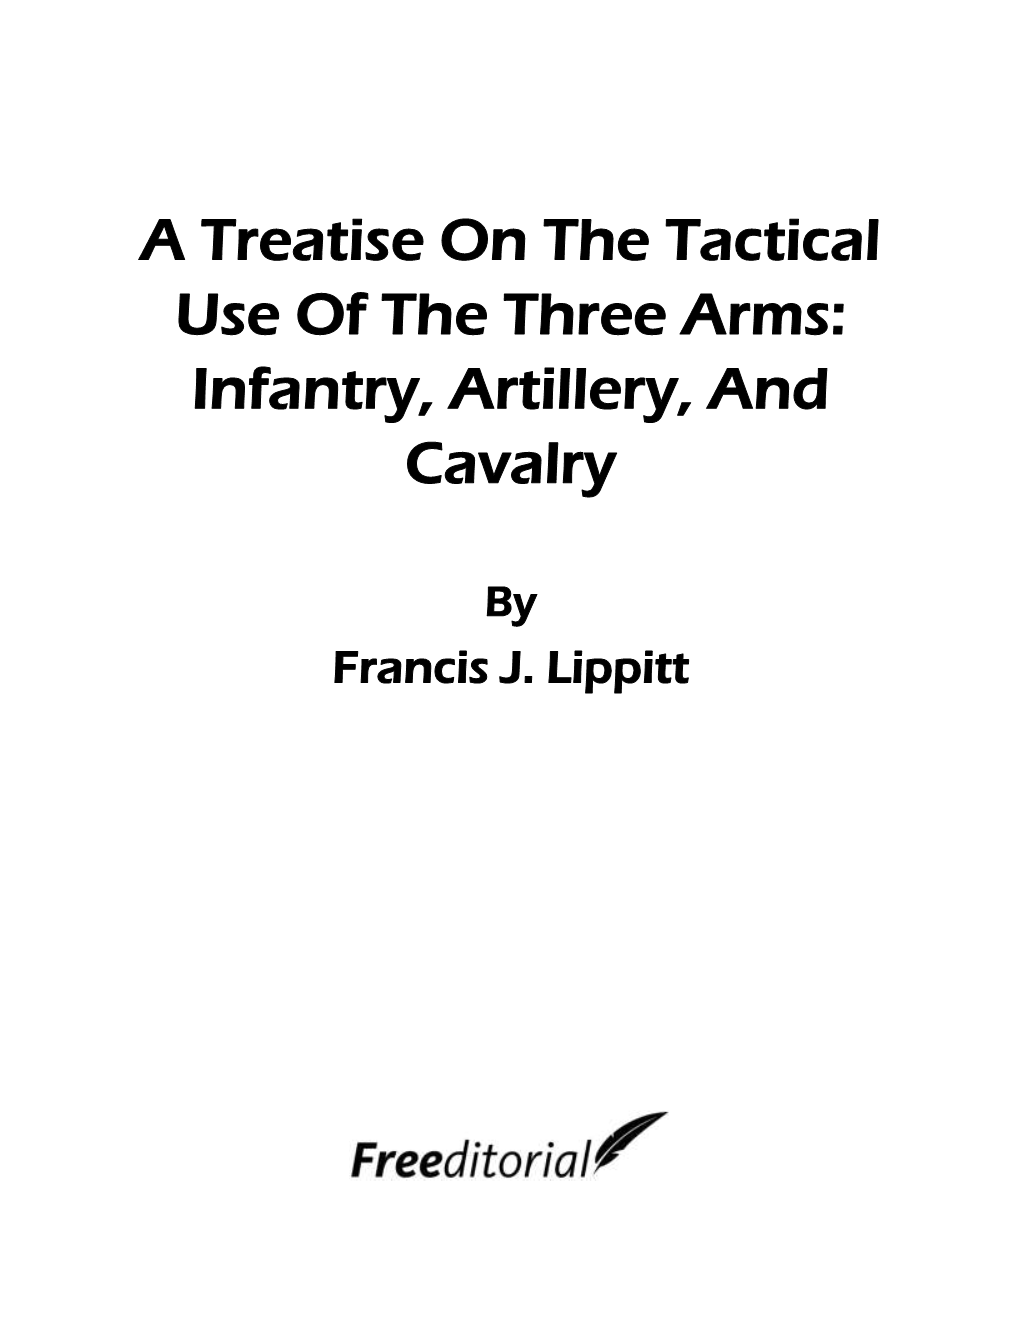 A Treatise on the Tactical Use of the Three Arms: Infantry, Artillery, and Cavalry